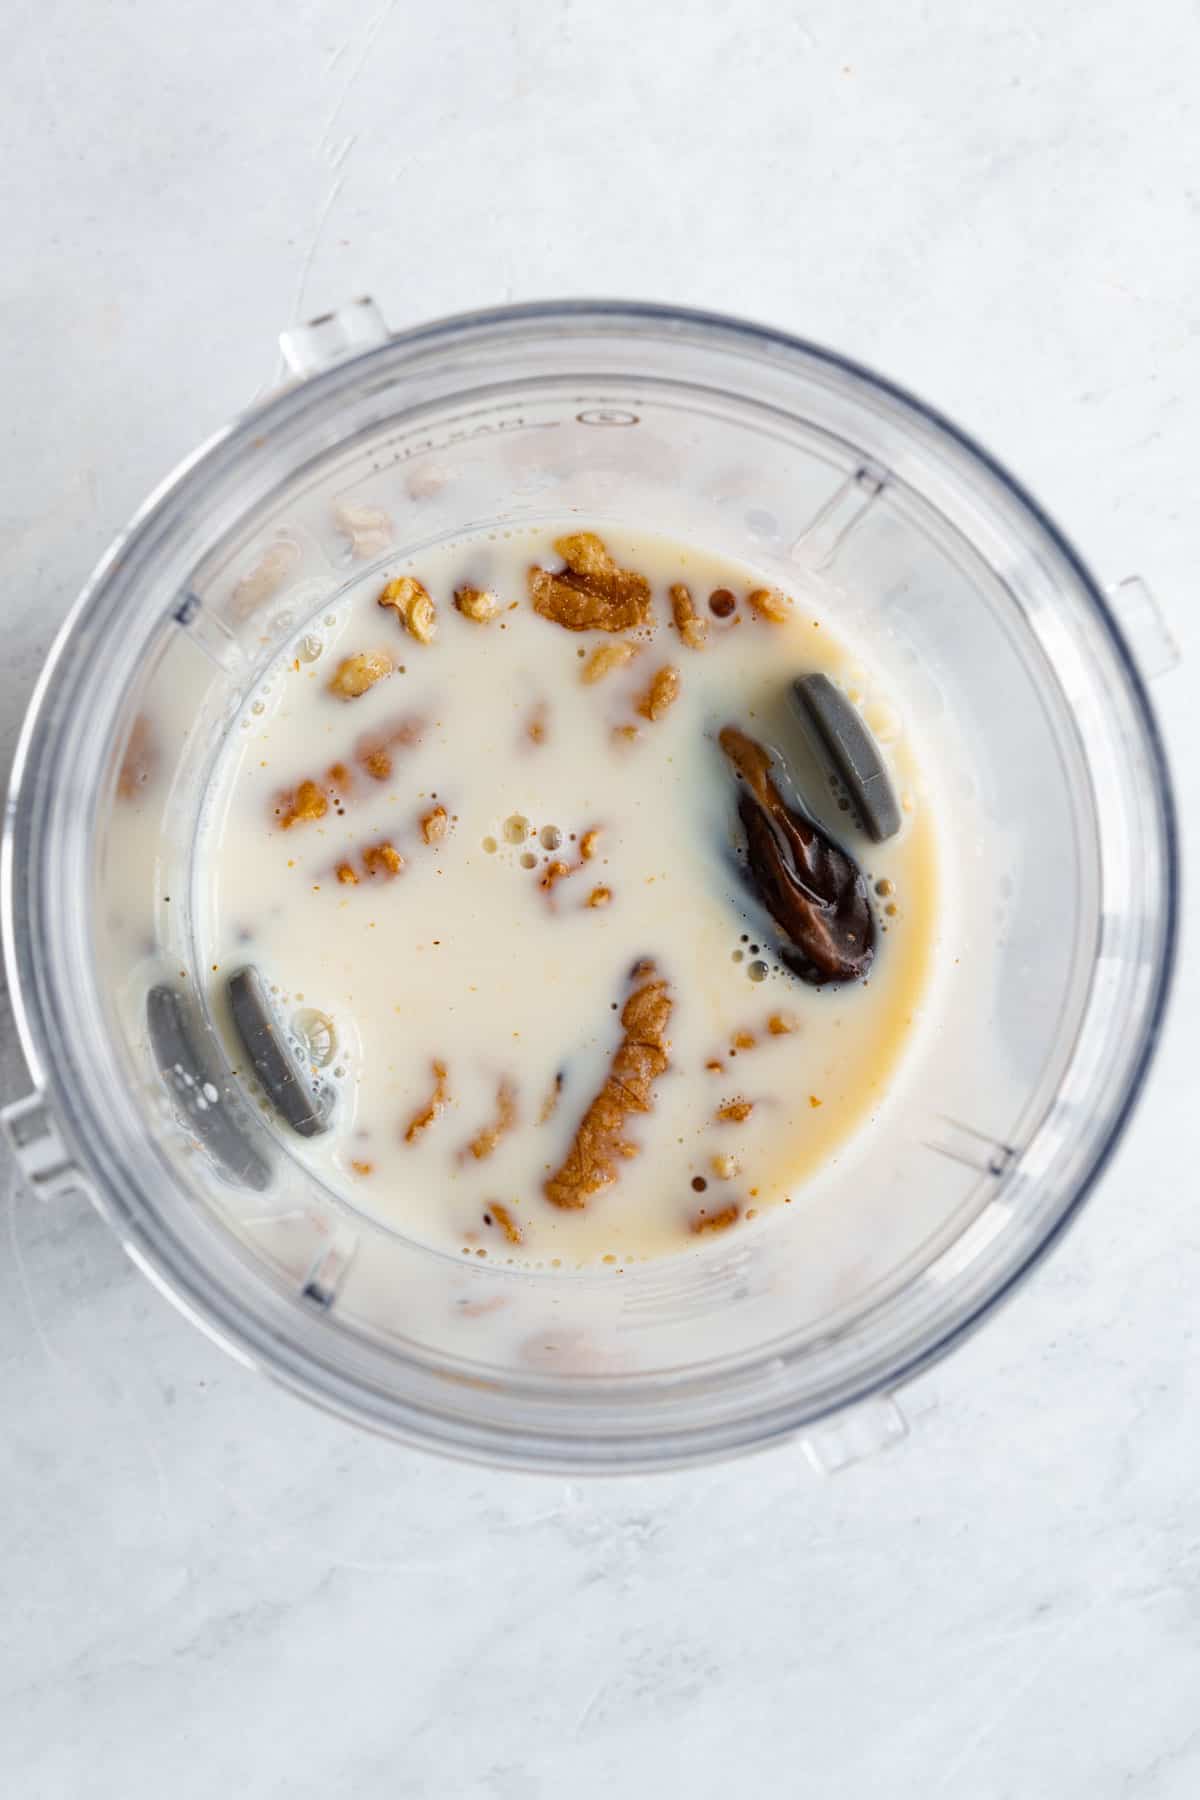 Nondairy milk, walnuts, and dates inside the canister of a blender.